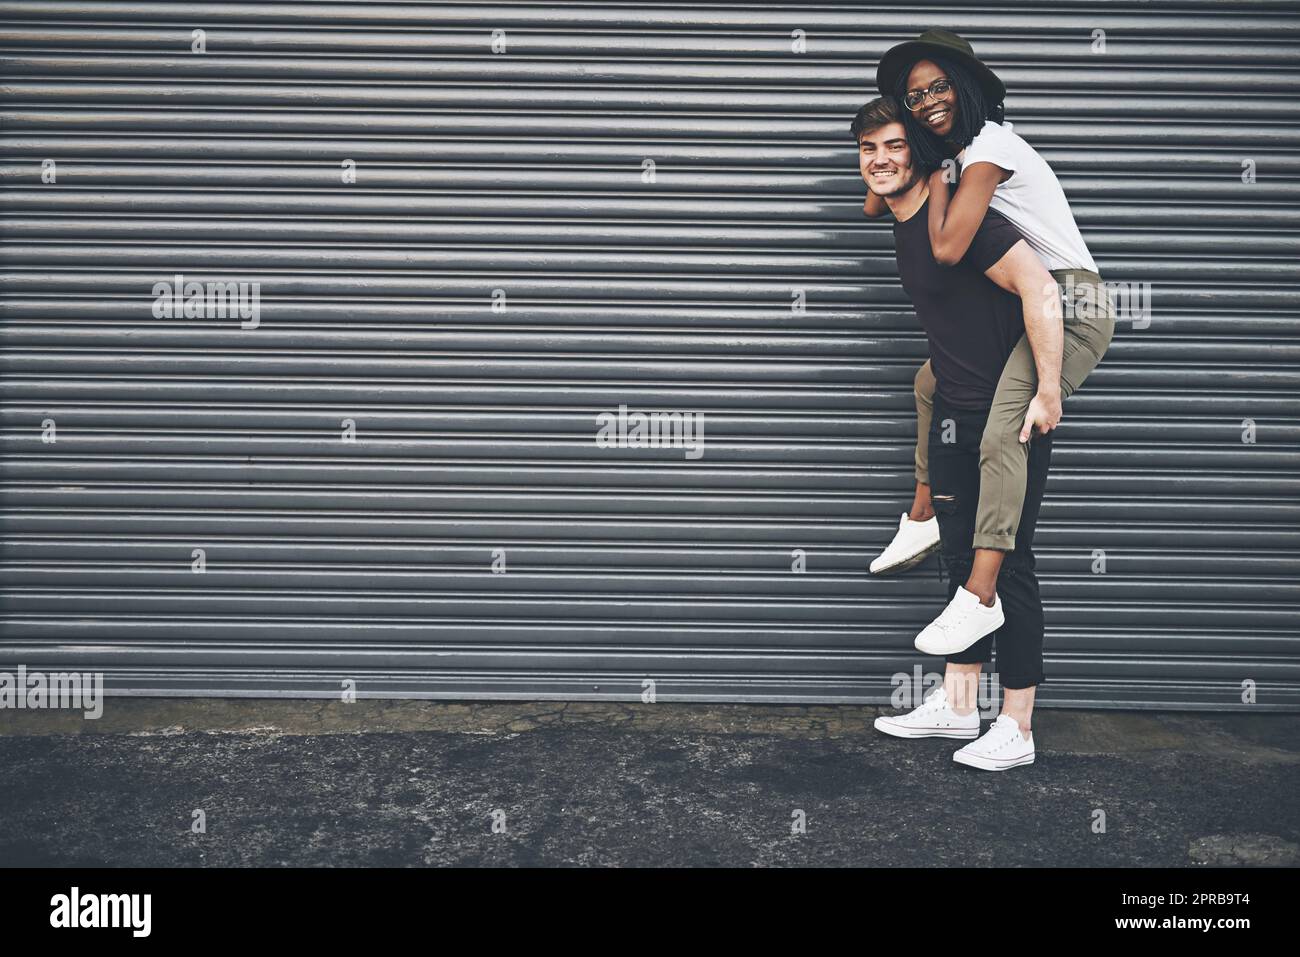 Fun, trendy and happy interracial couple enjoying a piggyback ride together outside against an urban background. Lovers bonding and being playful. Smiling and relaxing while walking outdoors Stock Photo